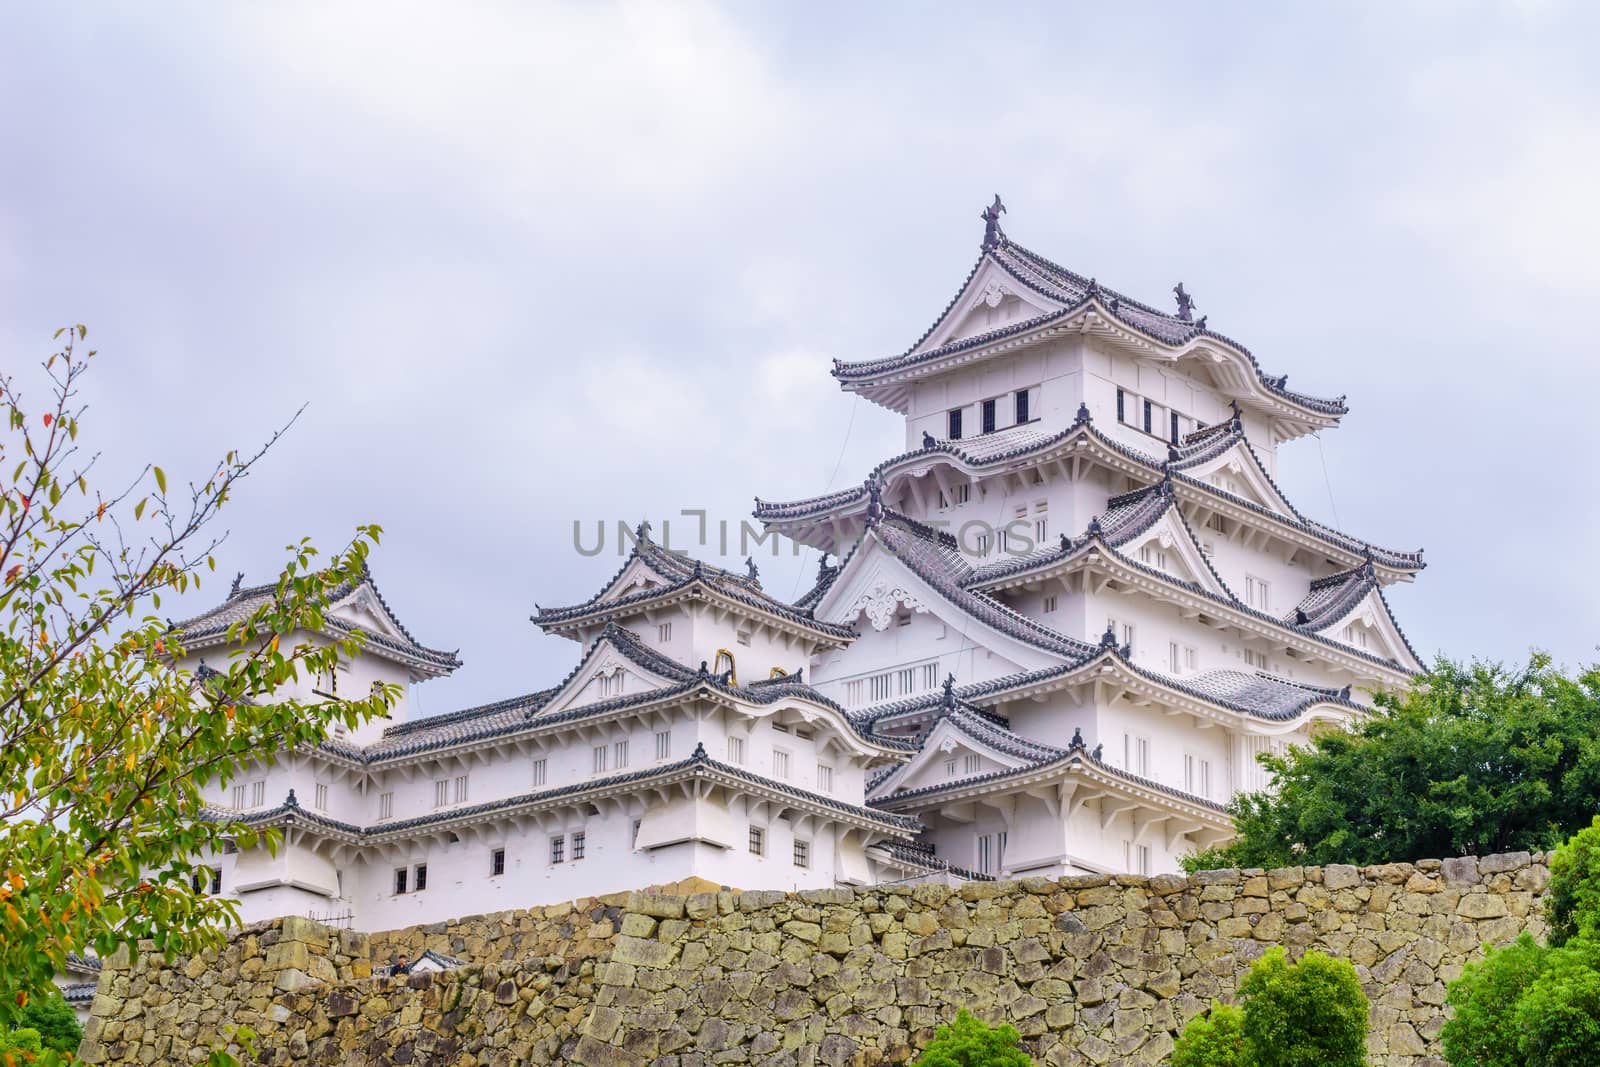 View of the Himeji Castle, dated 1333, in the city of Himeji, Hyogo Prefecture, Japan